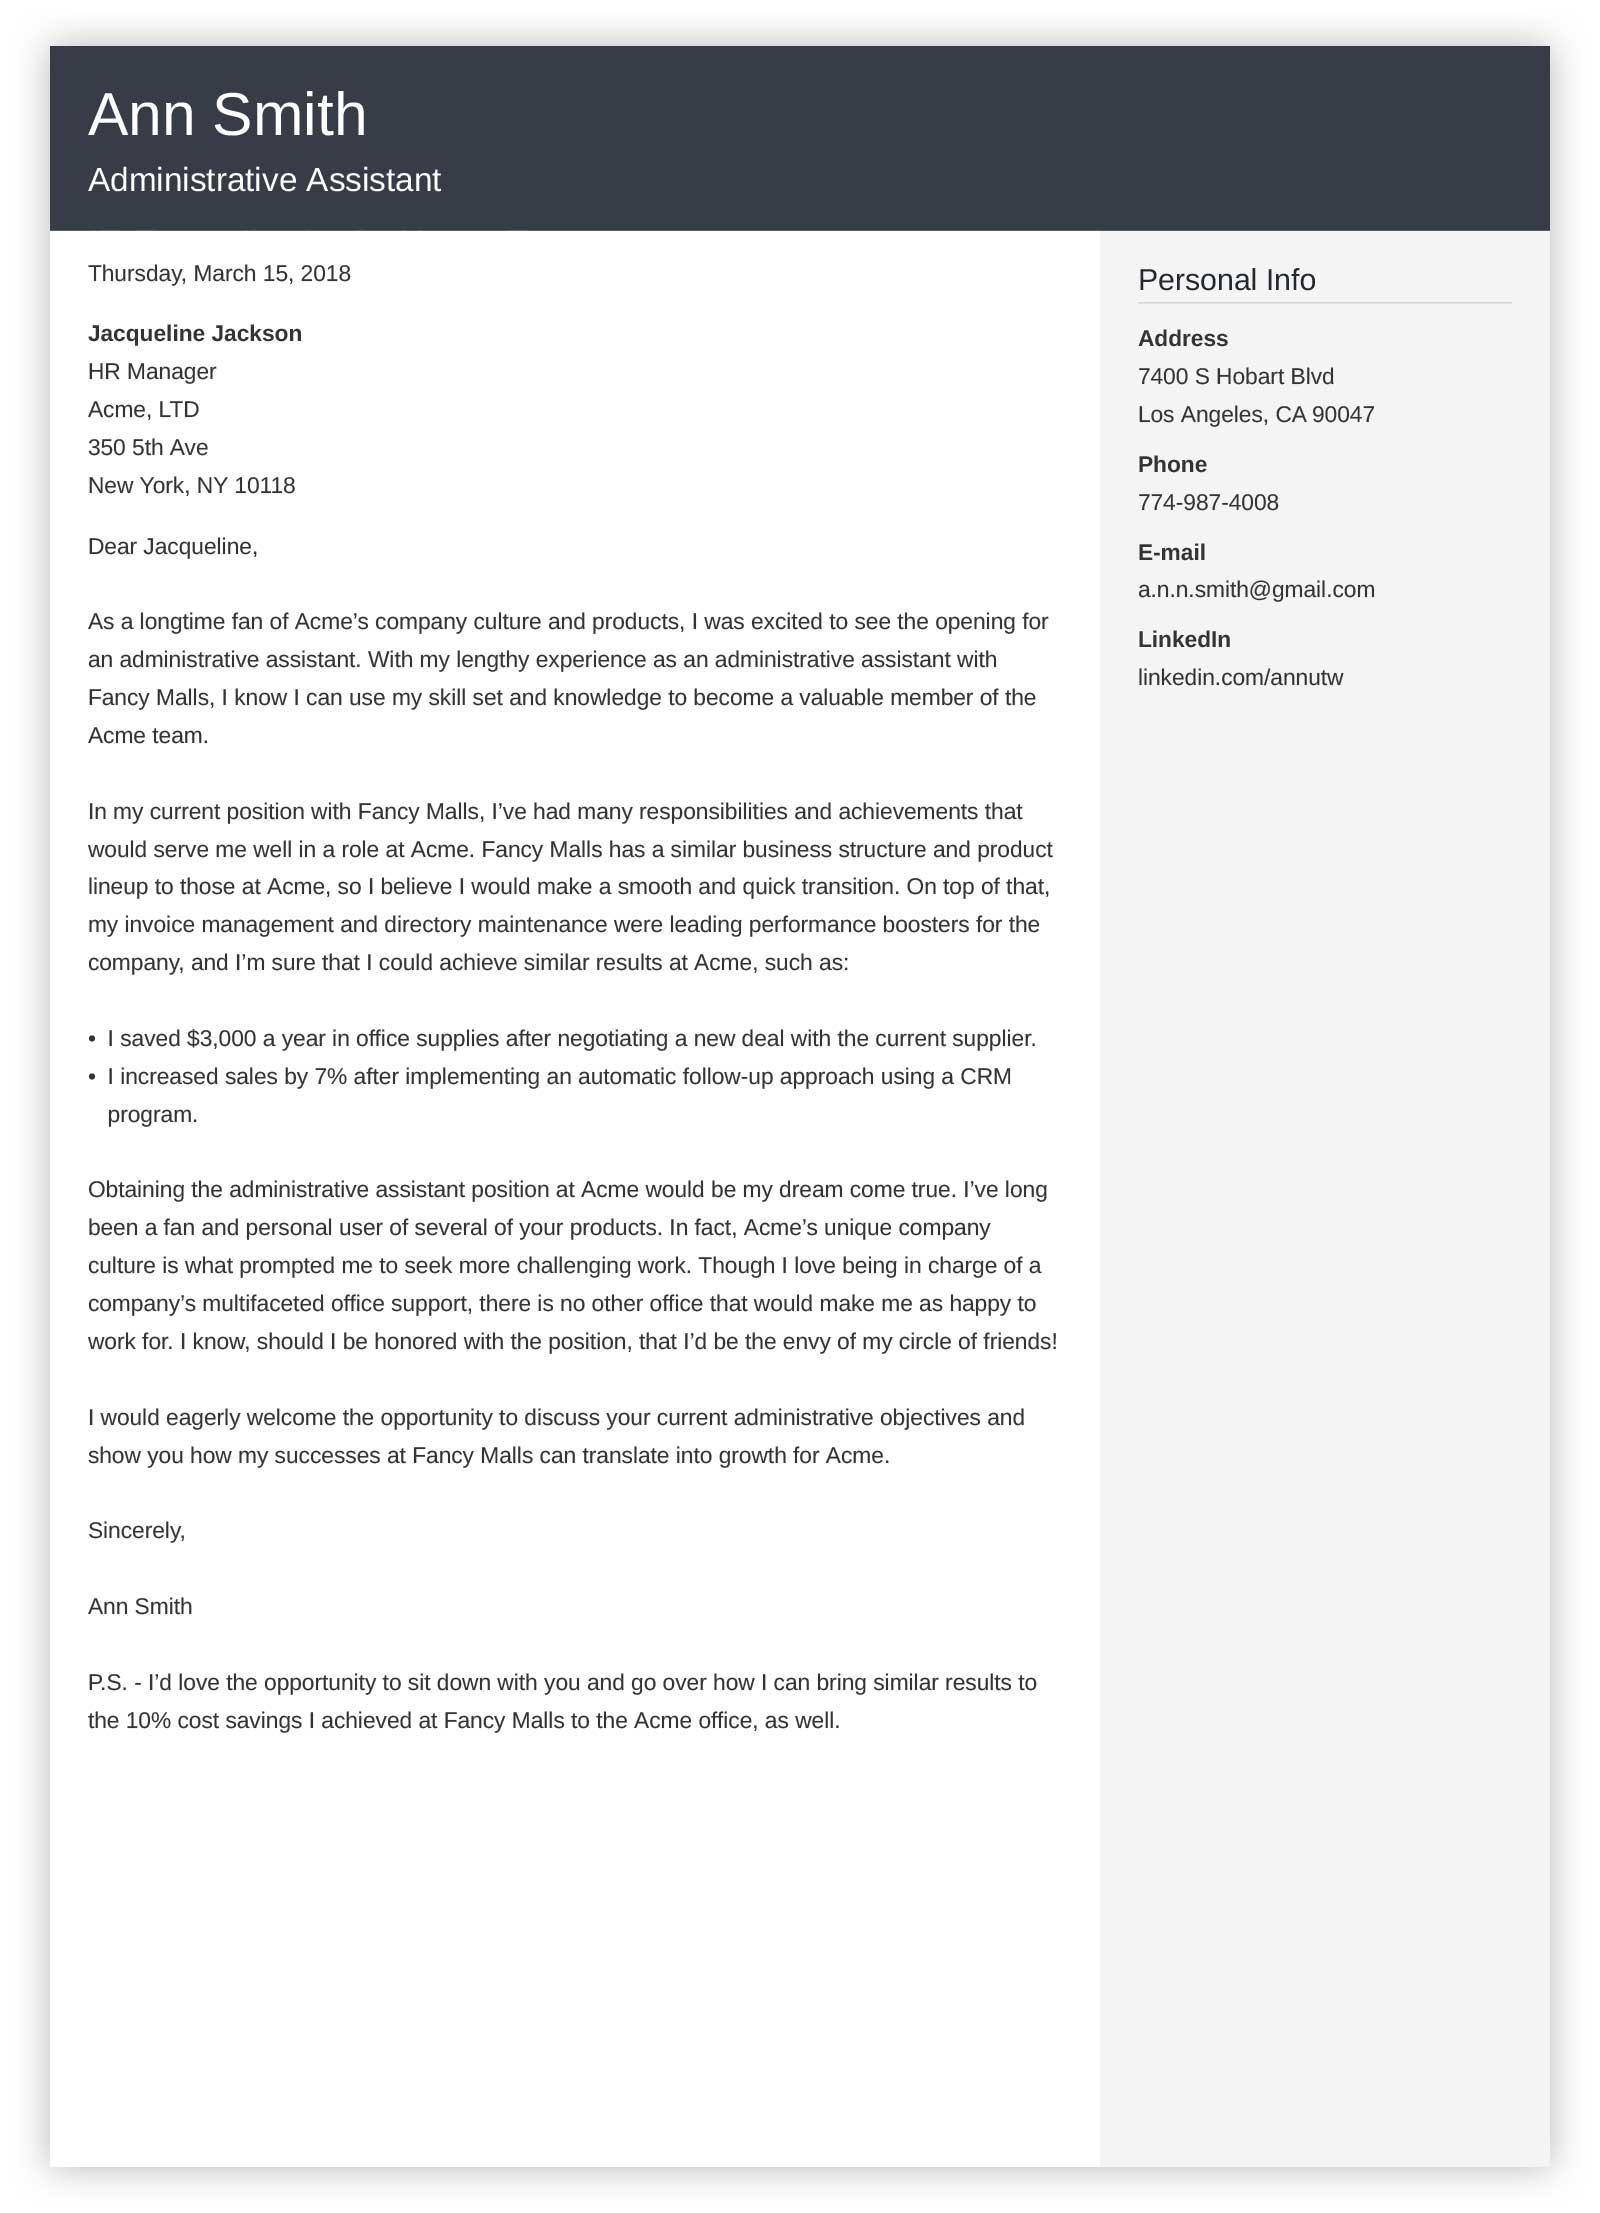 Administrative Assistant Cover Letter Sample & 19+ Tips